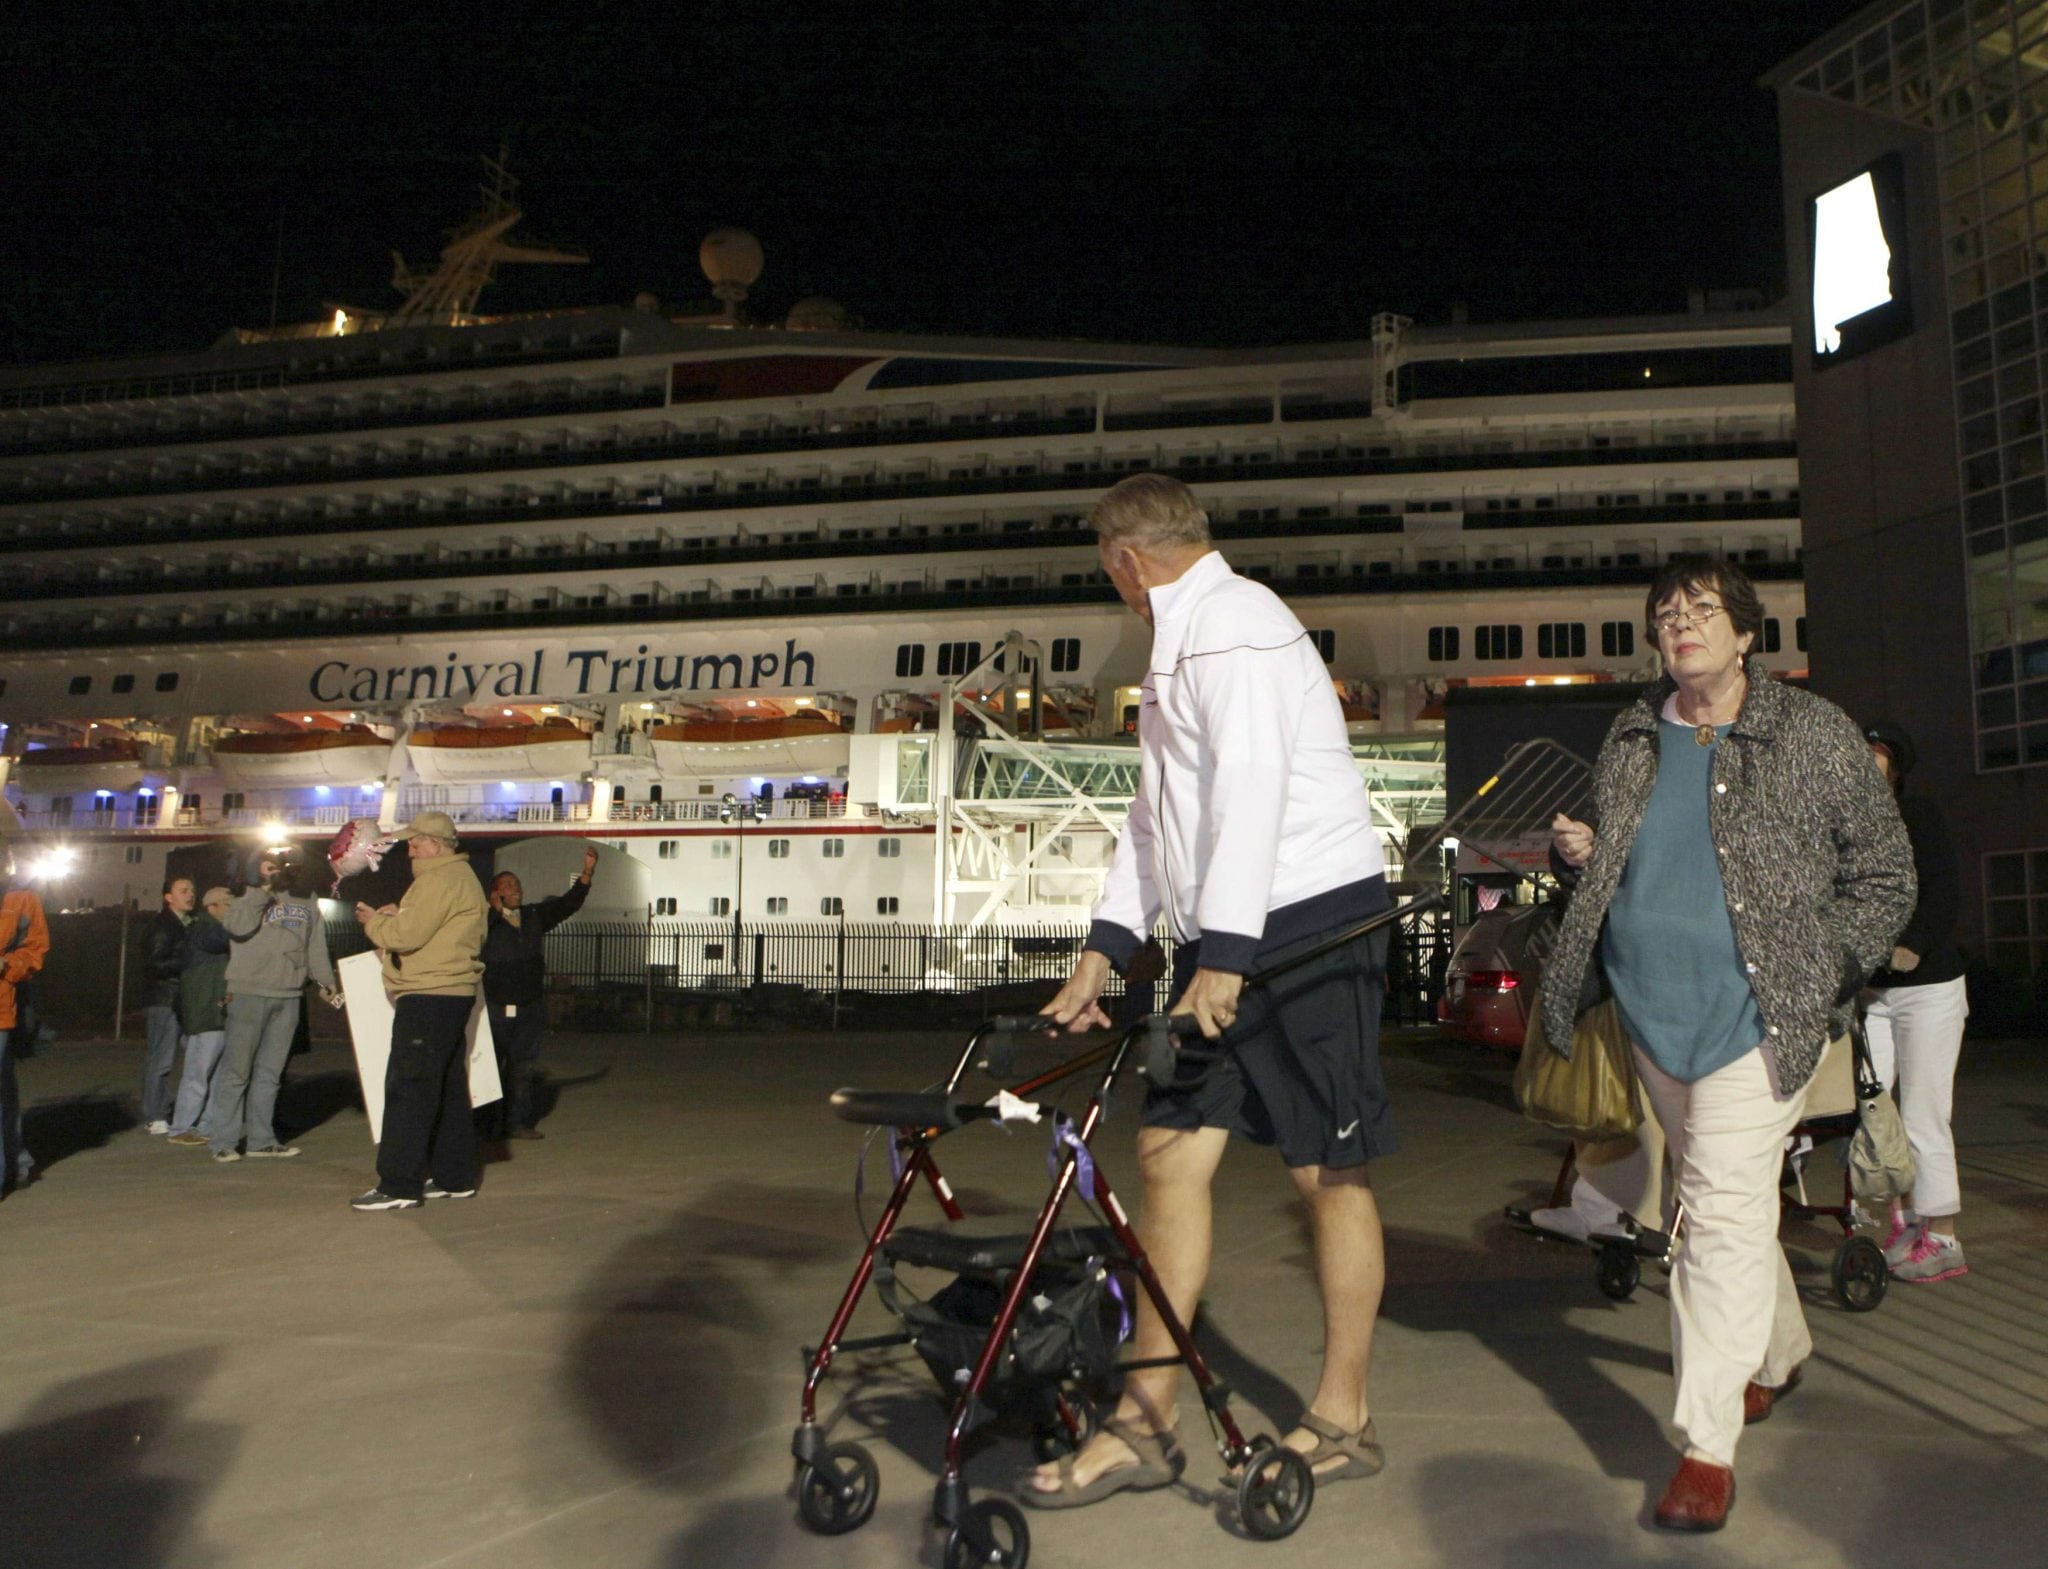 Passengers leave the Carnival Triumph cruise ship after reaching the port of Mobile, Alabama. 